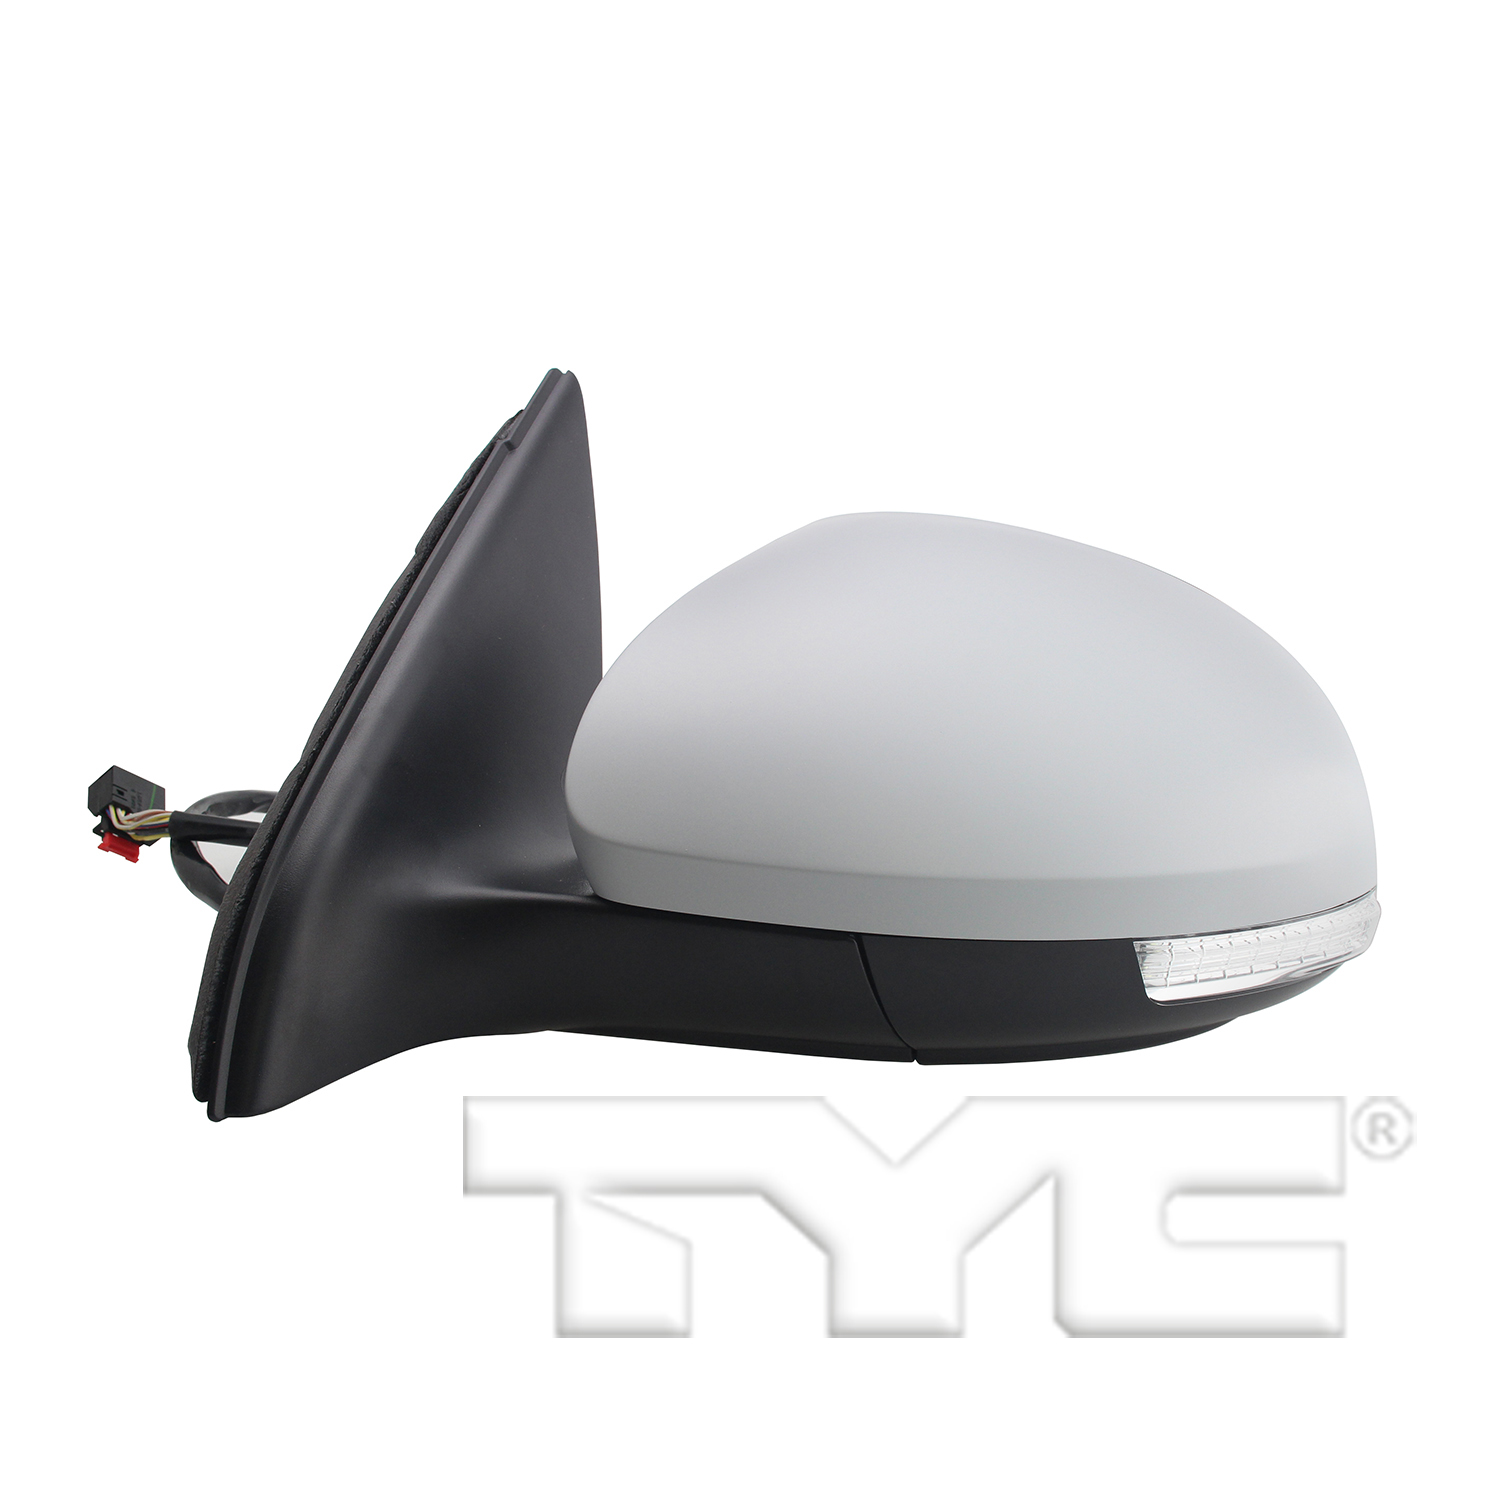 Aftermarket MIRRORS for VOLKSWAGEN - TIGUAN, TIGUAN,09-18,LT Mirror outside rear view